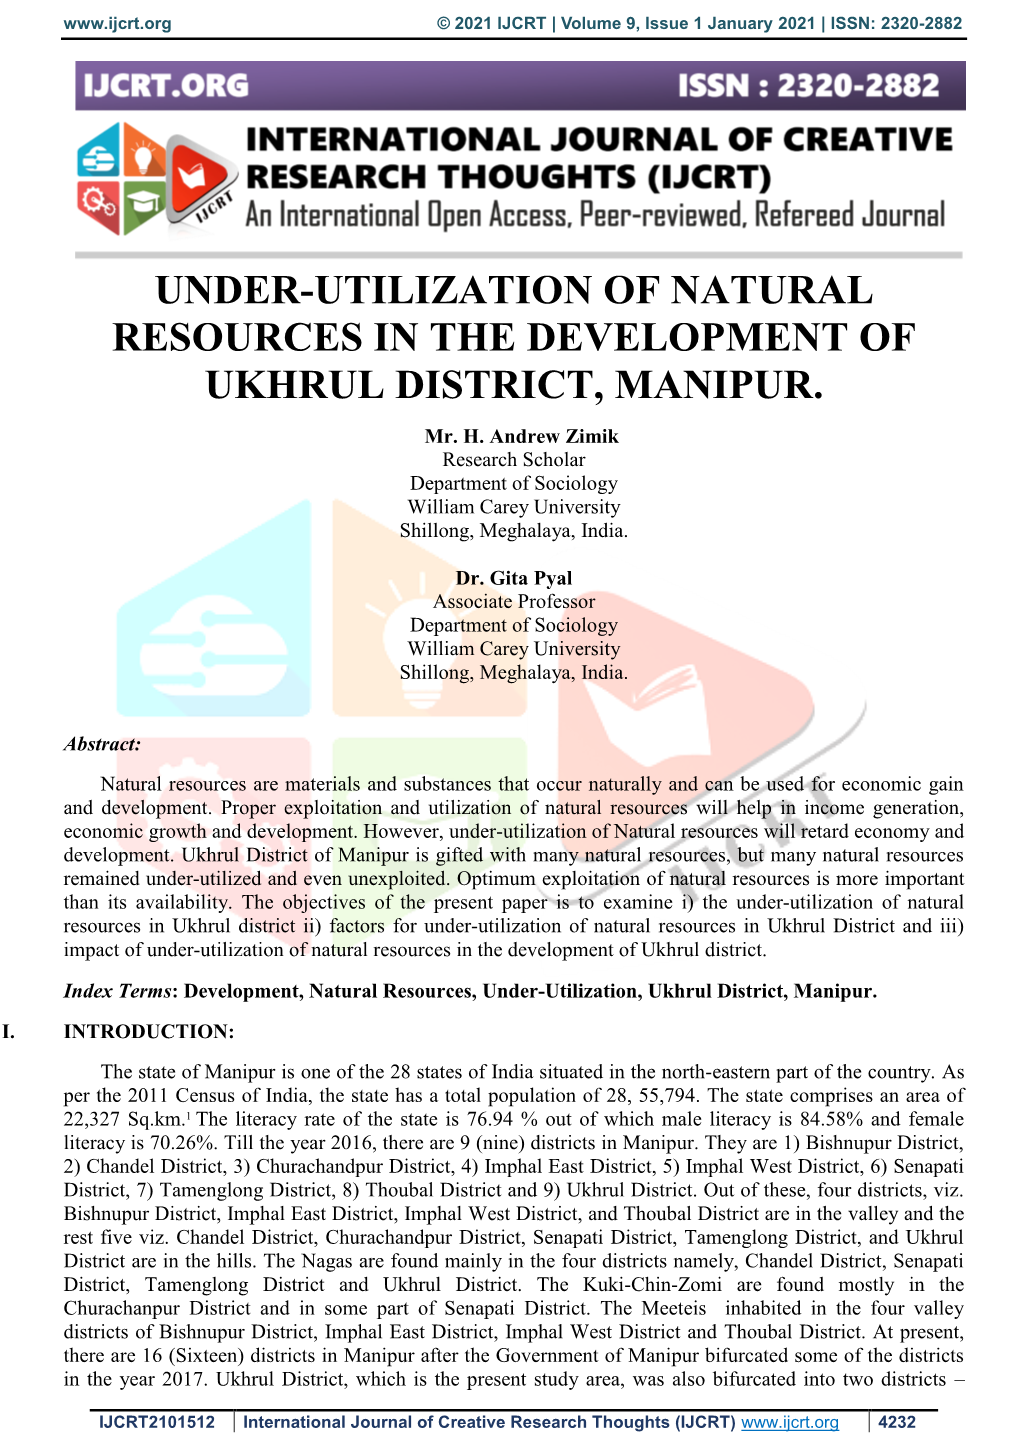 Under-Utilization of Natural Resources in the Development of Ukhrul District, Manipur